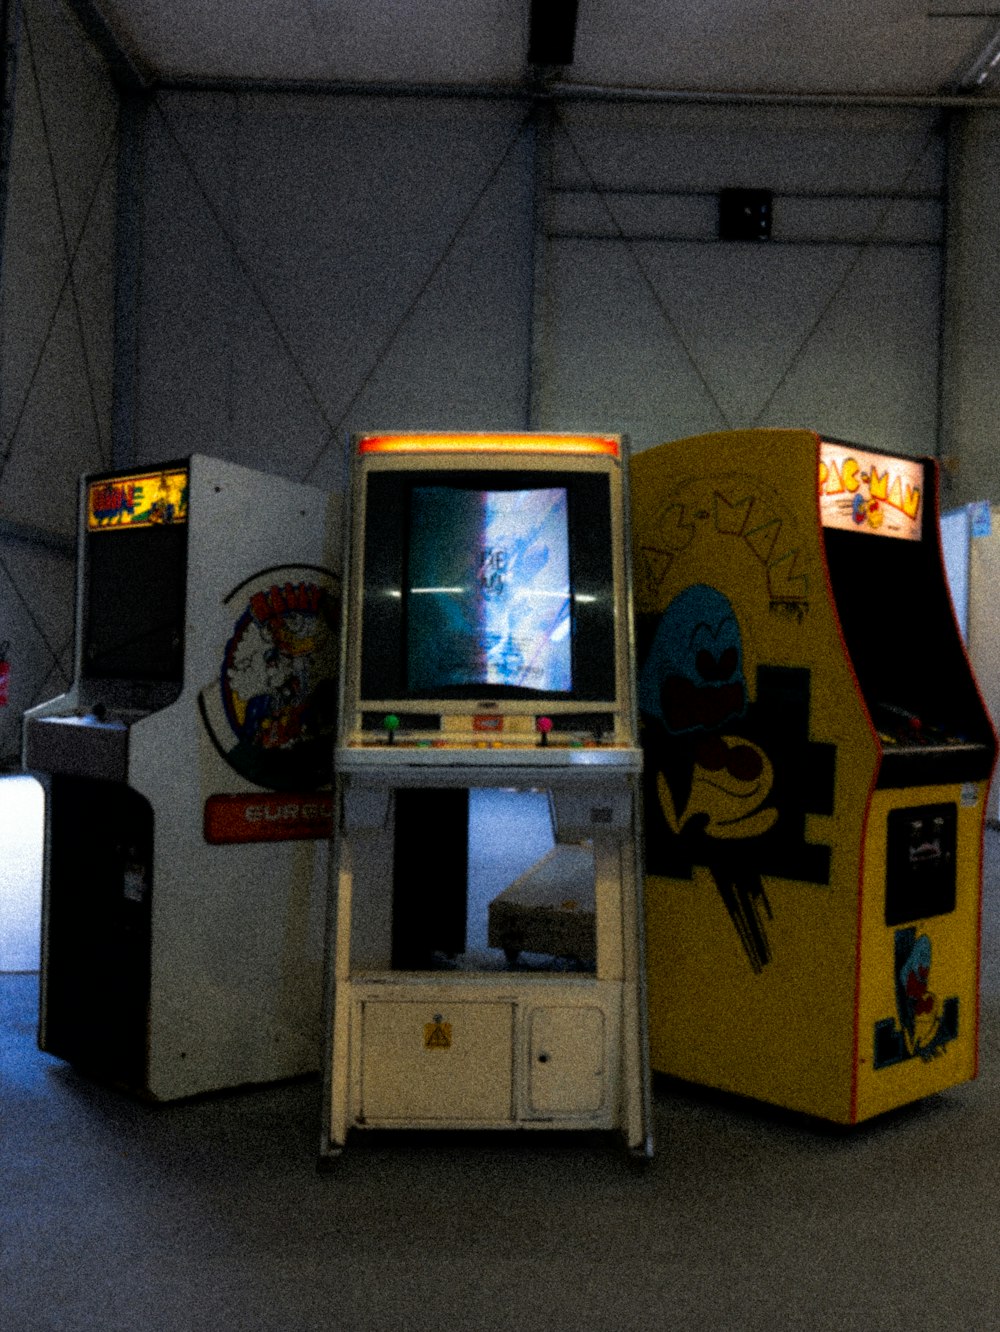 a group of arcade machines sitting next to each other